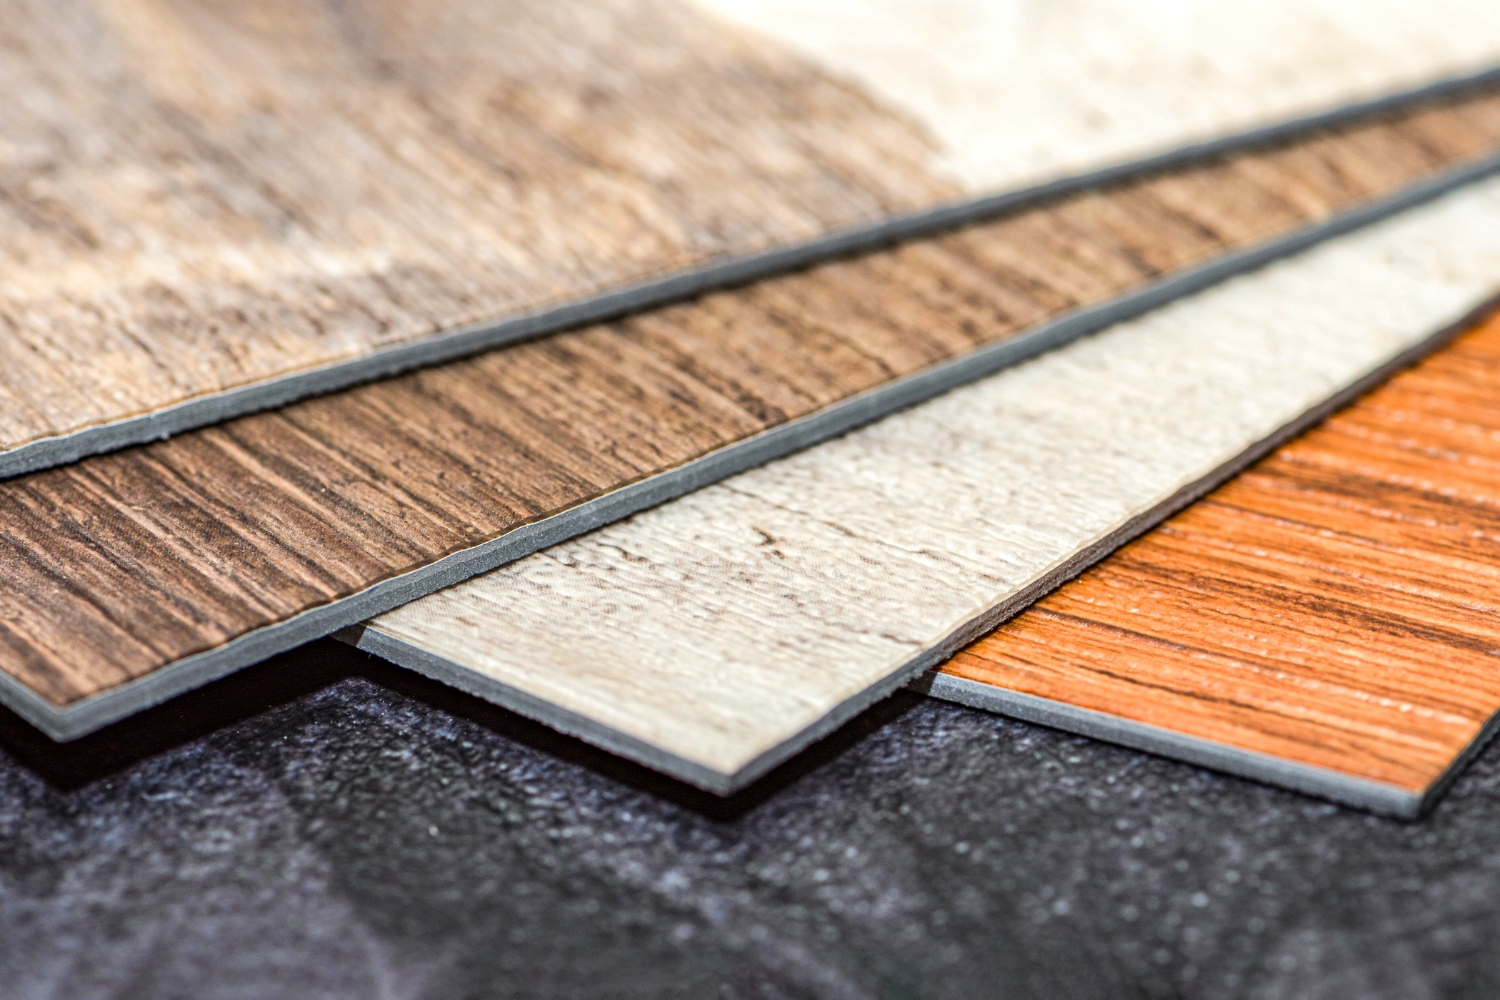 Samples of vinyl floor tiles with different wooden textures and colors